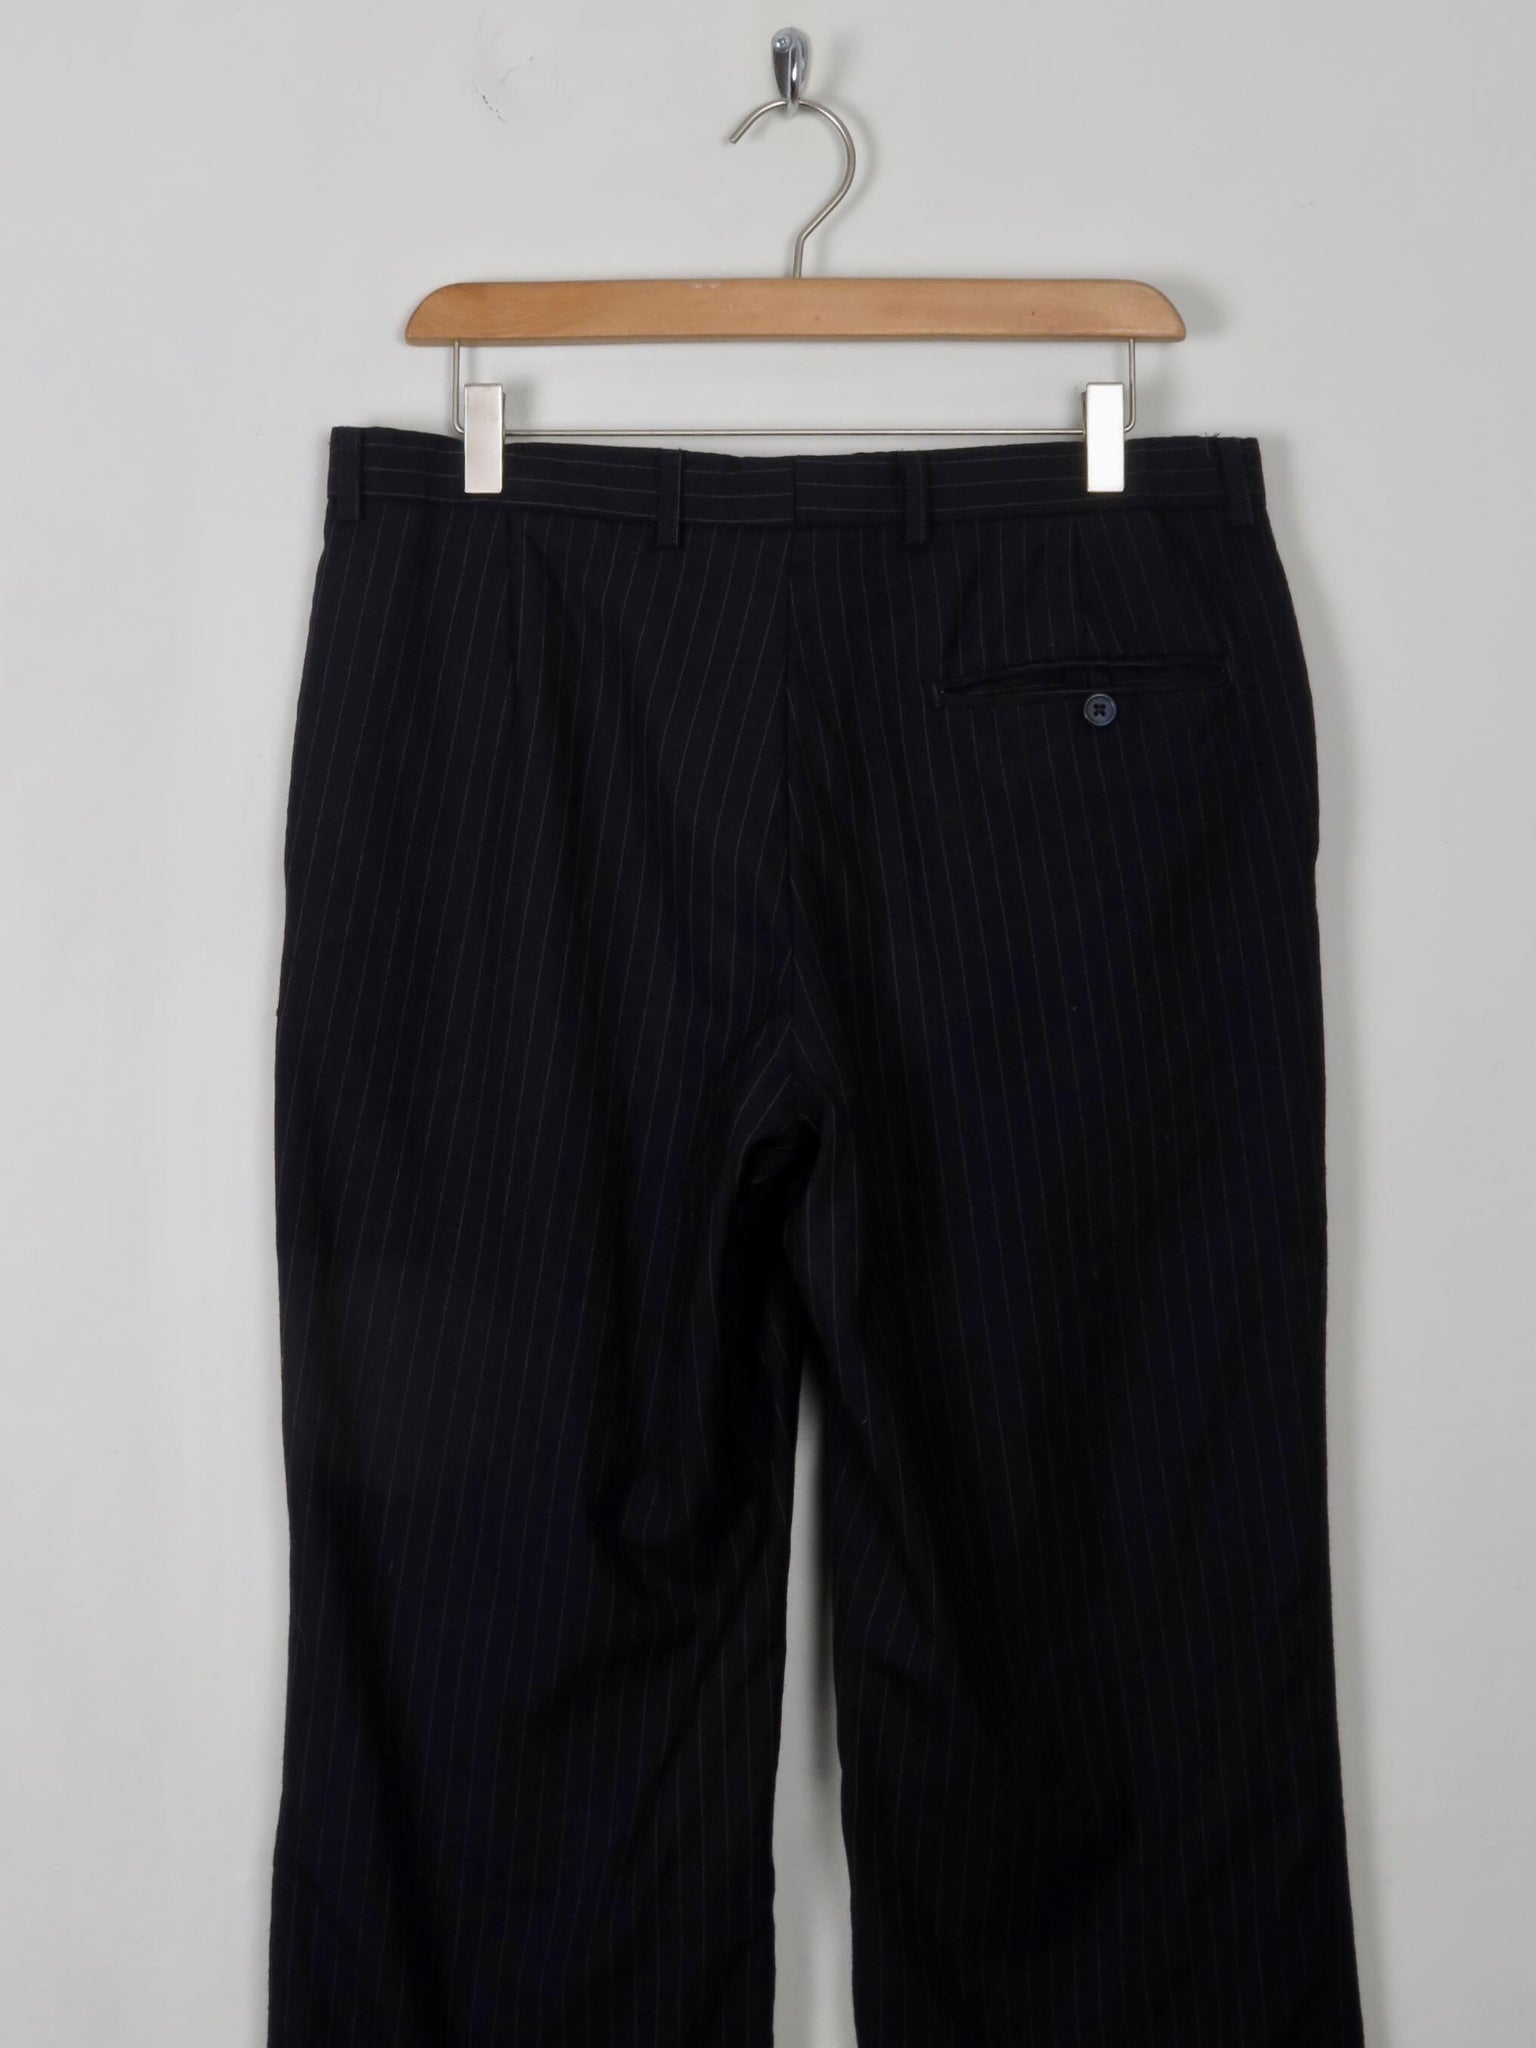 Men's Vintage Navy & White Pinstripe Wool Trousers 33"W 31" L - The Harlequin